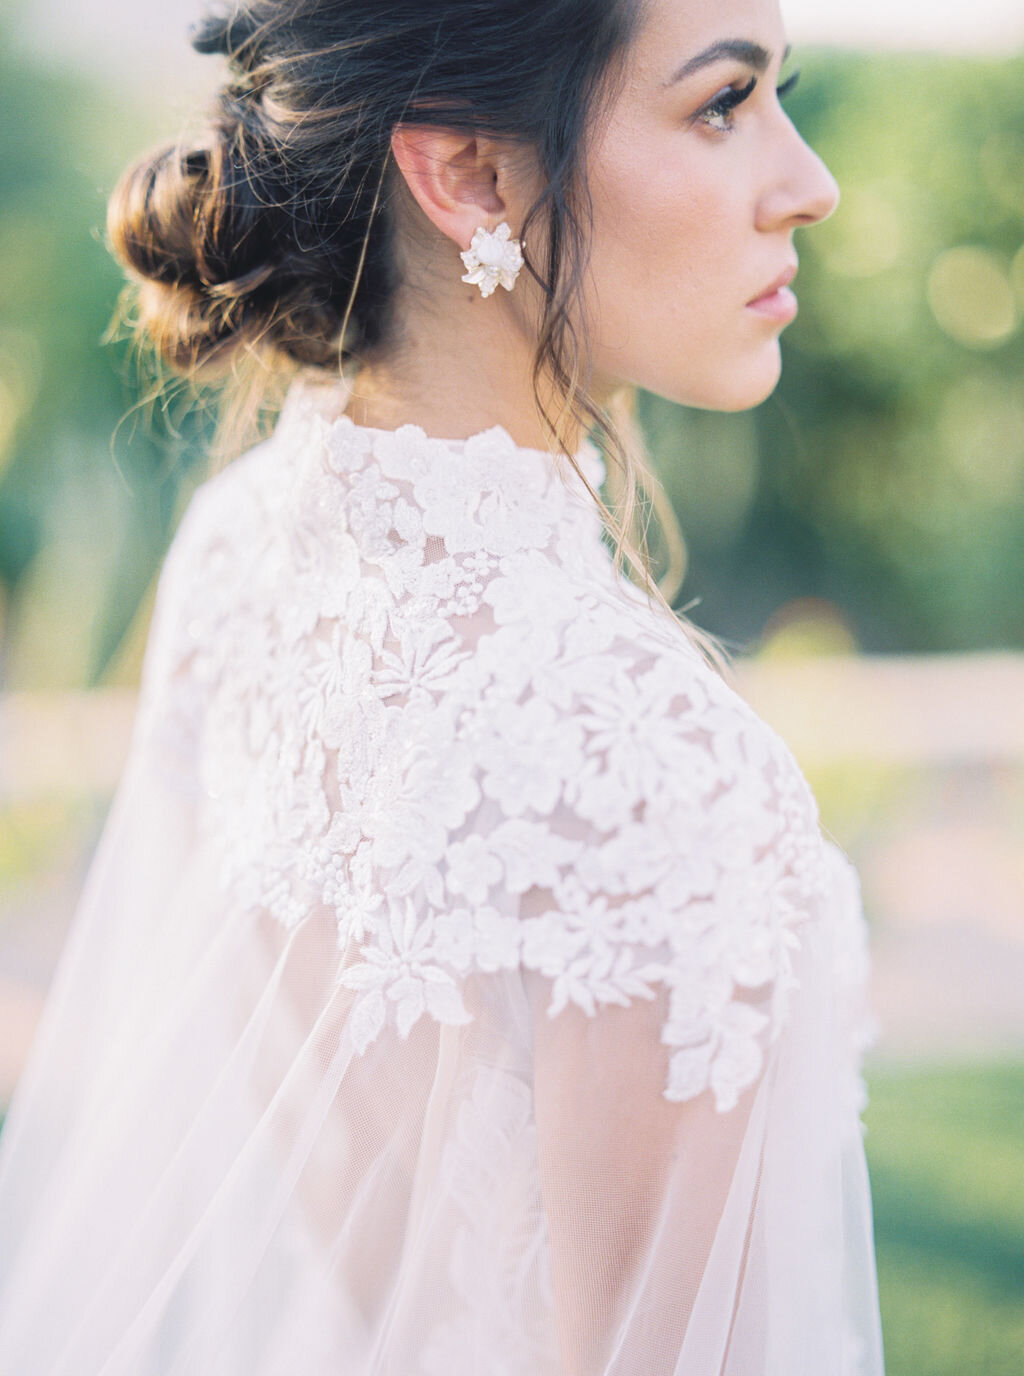 The Prettiest Dried Pressed Flowers Editorial at Sanctuary Camelback in ...